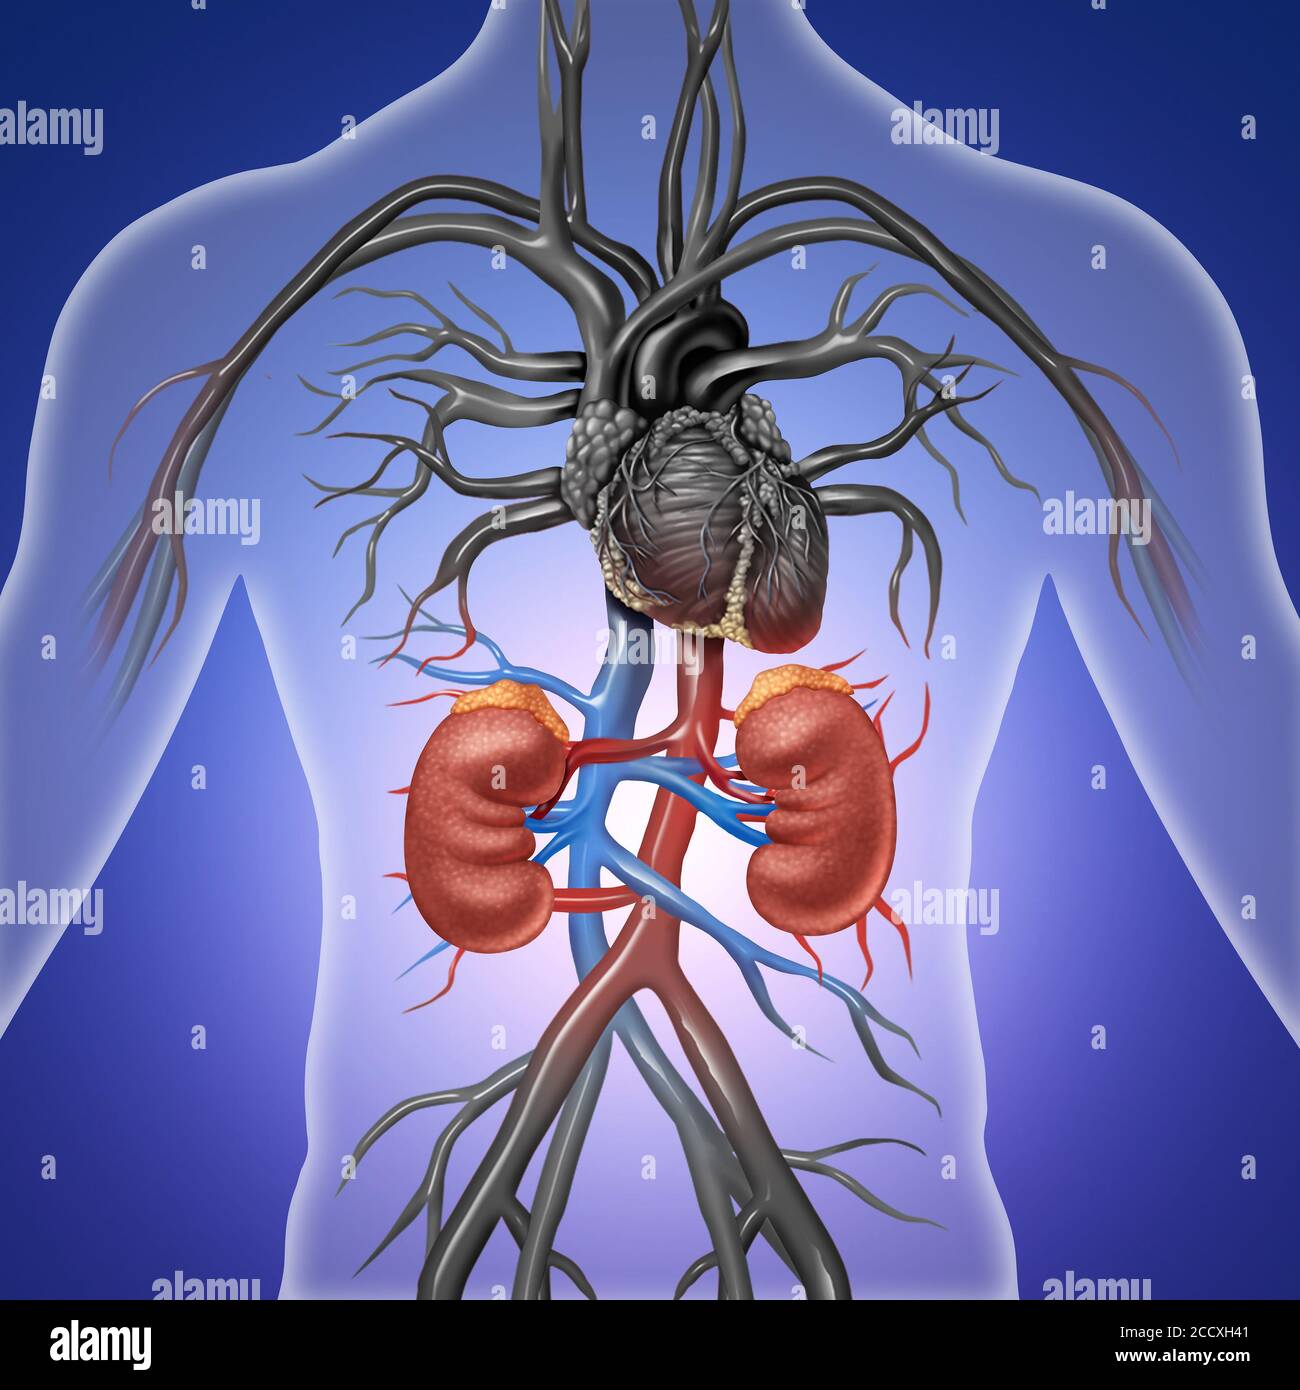 Human kidneys with red and blue arteries as a medical illustration of the inside anatomy of the urinary system as a diagram in a 3D illustration style Stock Photo